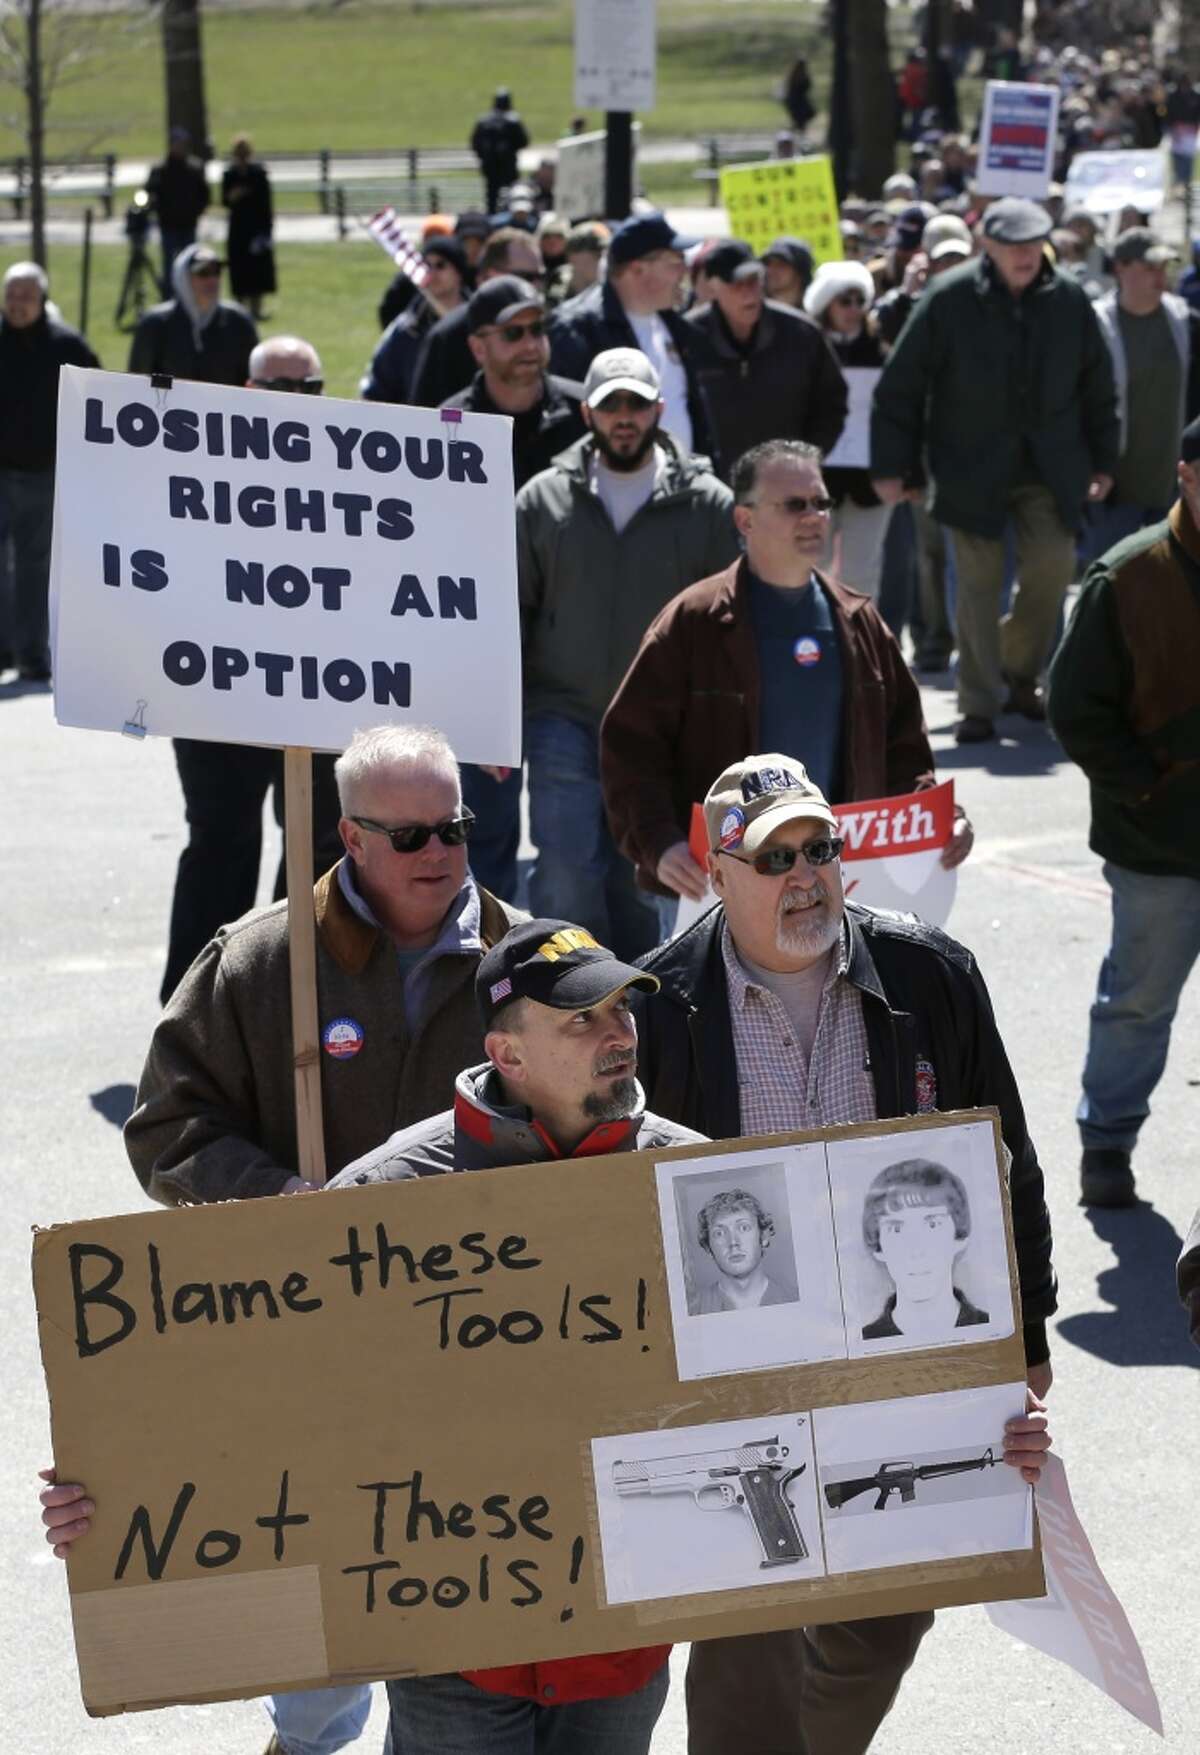 Gun owners and supporters display placards as they march toward the Statehouse, in Boston, Wednesday, April 3, 2013. The demonstration and rally, organized by the Gun Owners Action League, was held to call attention to Second Amendment rights as gun control advocates push for tougher laws in Massachusetts in the wake of the deadly shooting at an elementary school in Newtown, Conn.